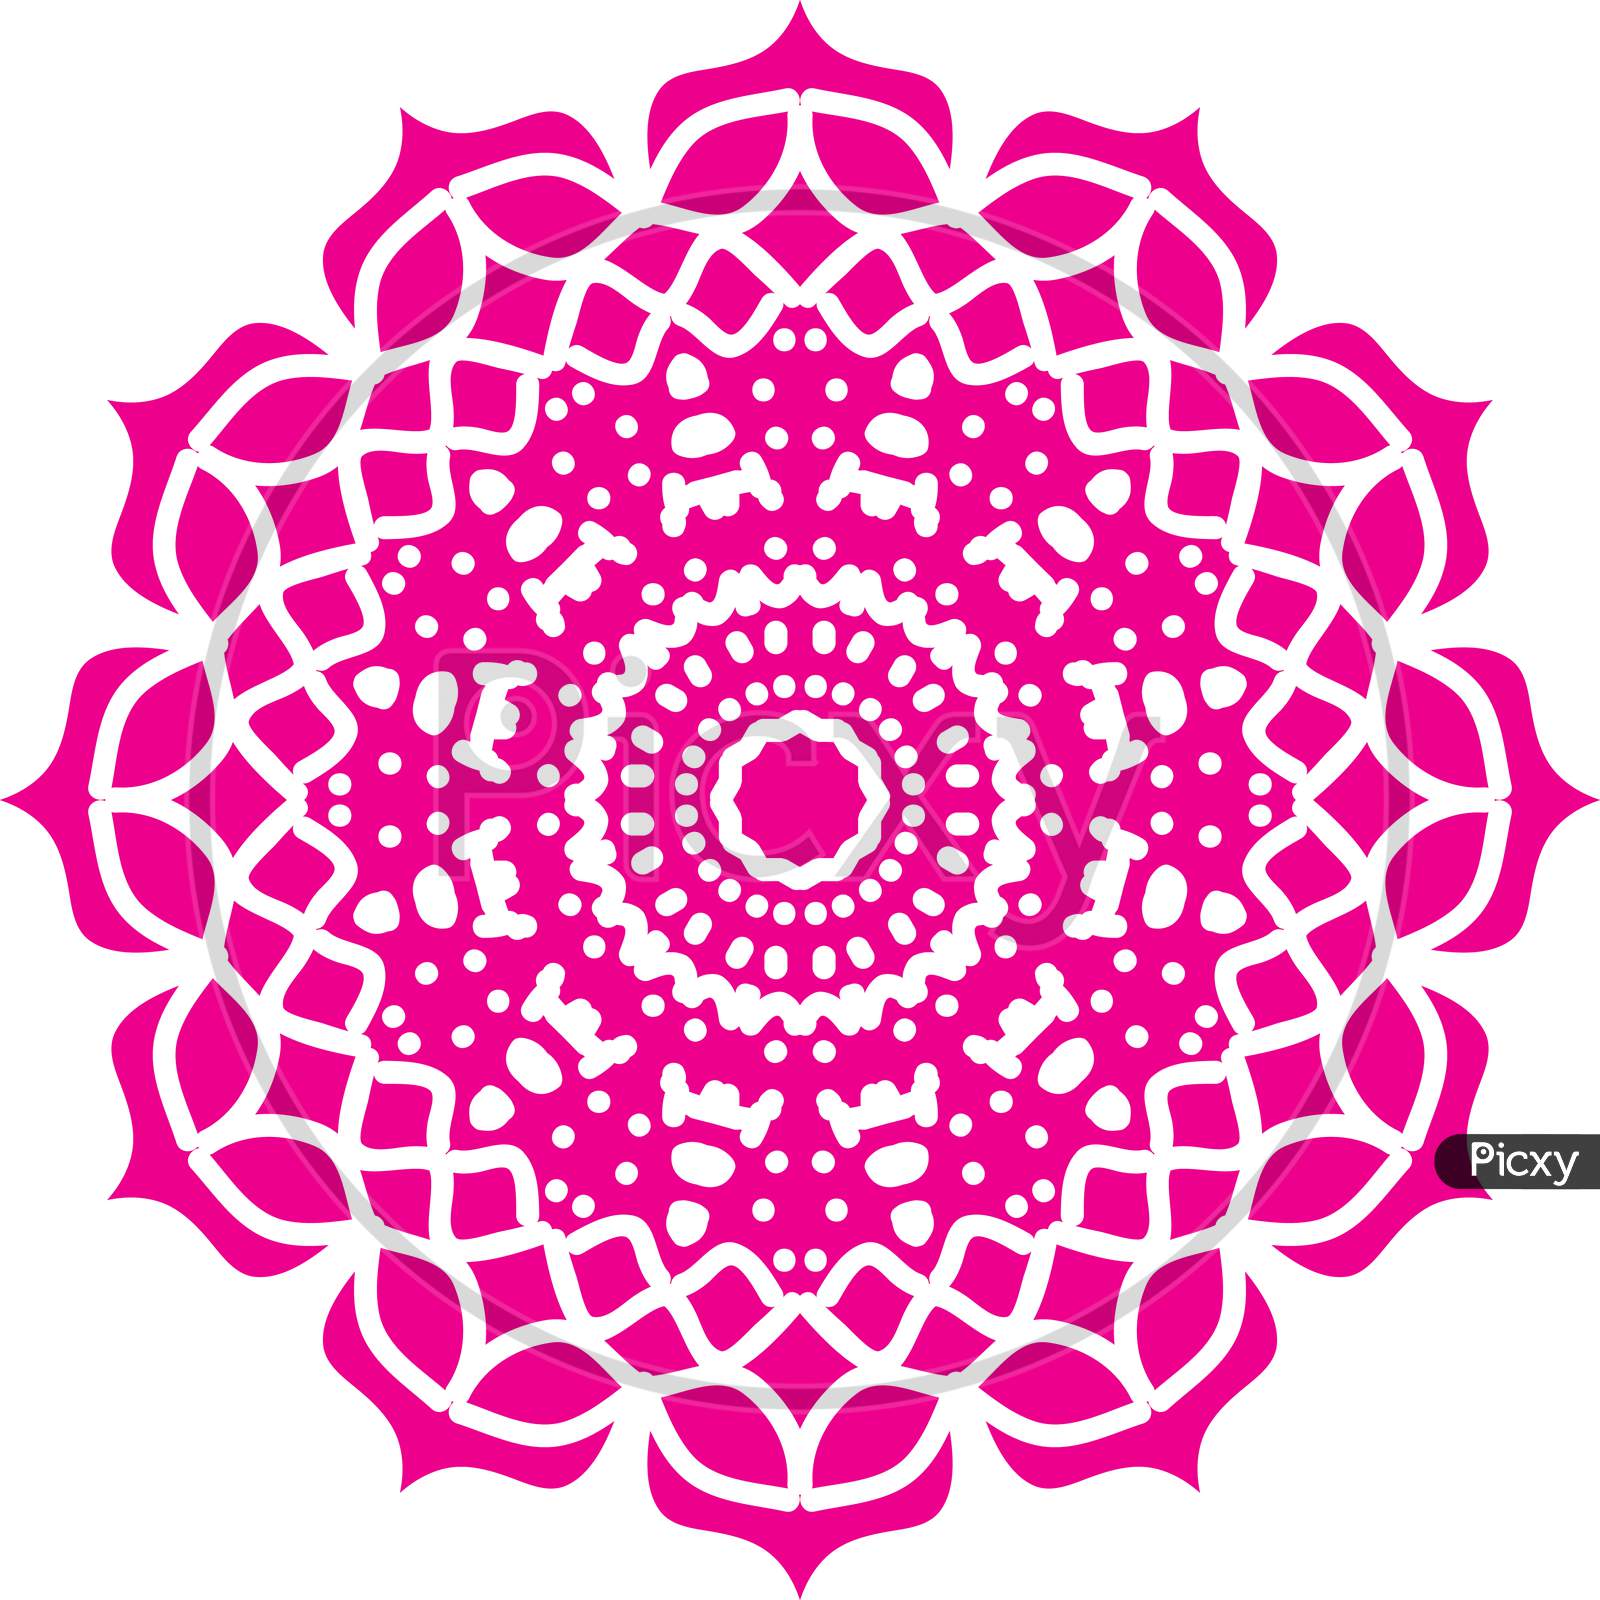 Mandalas for coloring book. Decorative round ornaments. Unusual flower shape. Oriental vector, Anti-stress therapy patterns. Weave design elements. Yoga logos